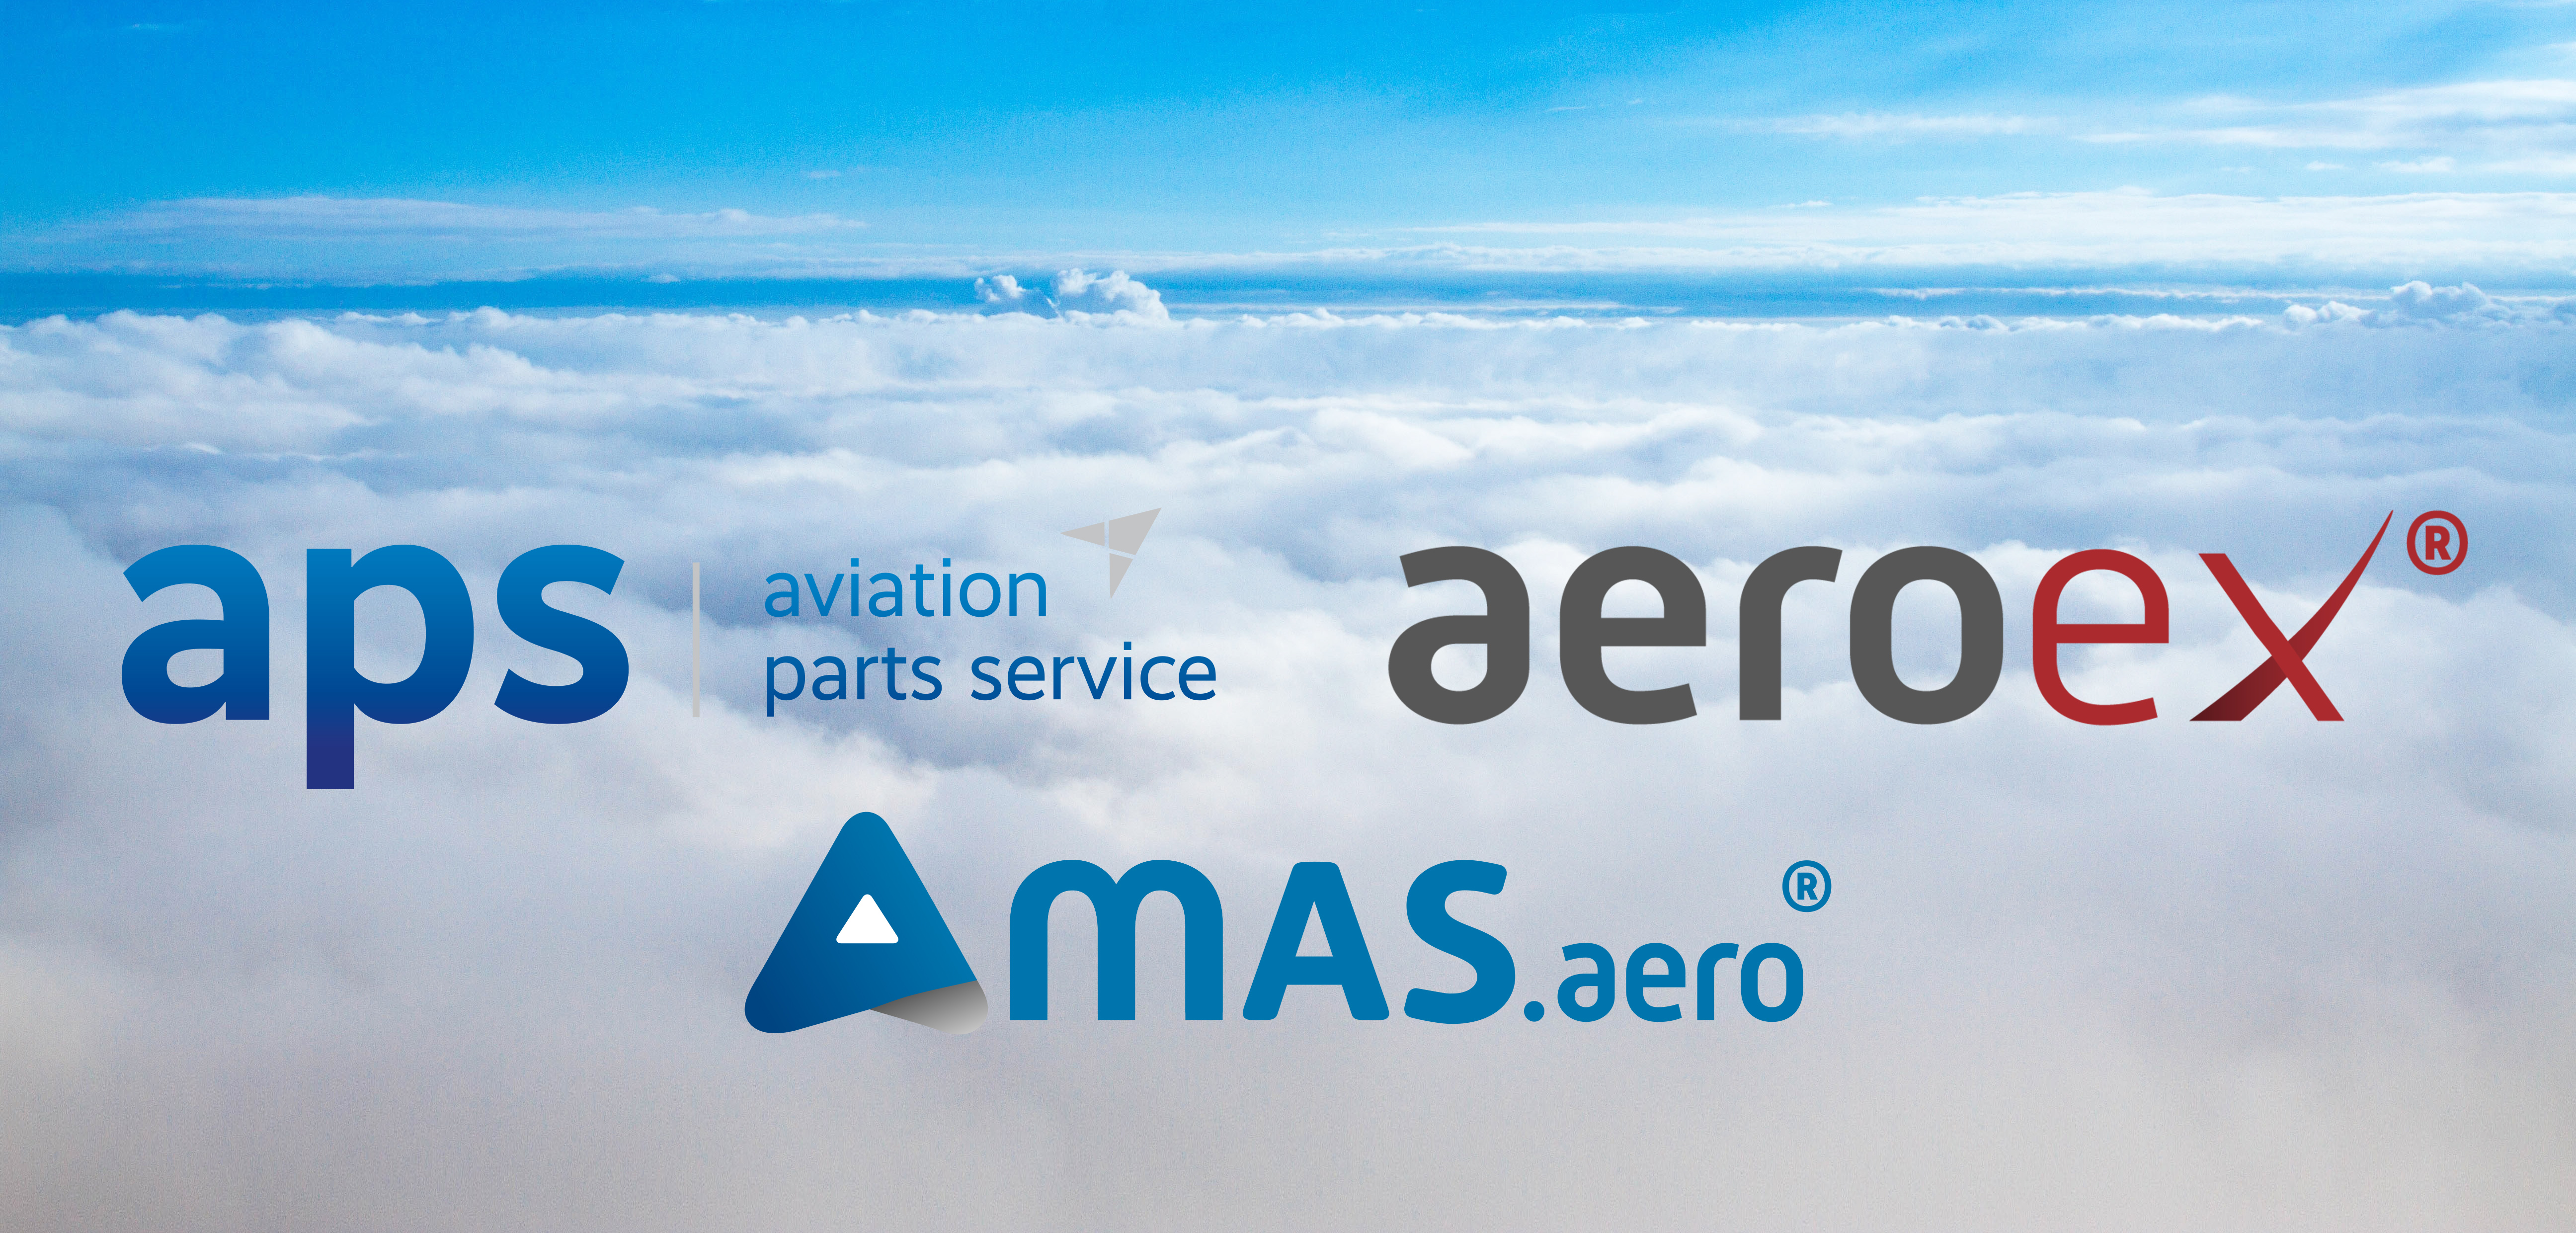 For immediate release: aps and AeroEx  Announce Strategic Partnership to Enhance Compliance and Safety in the Aviation Industry